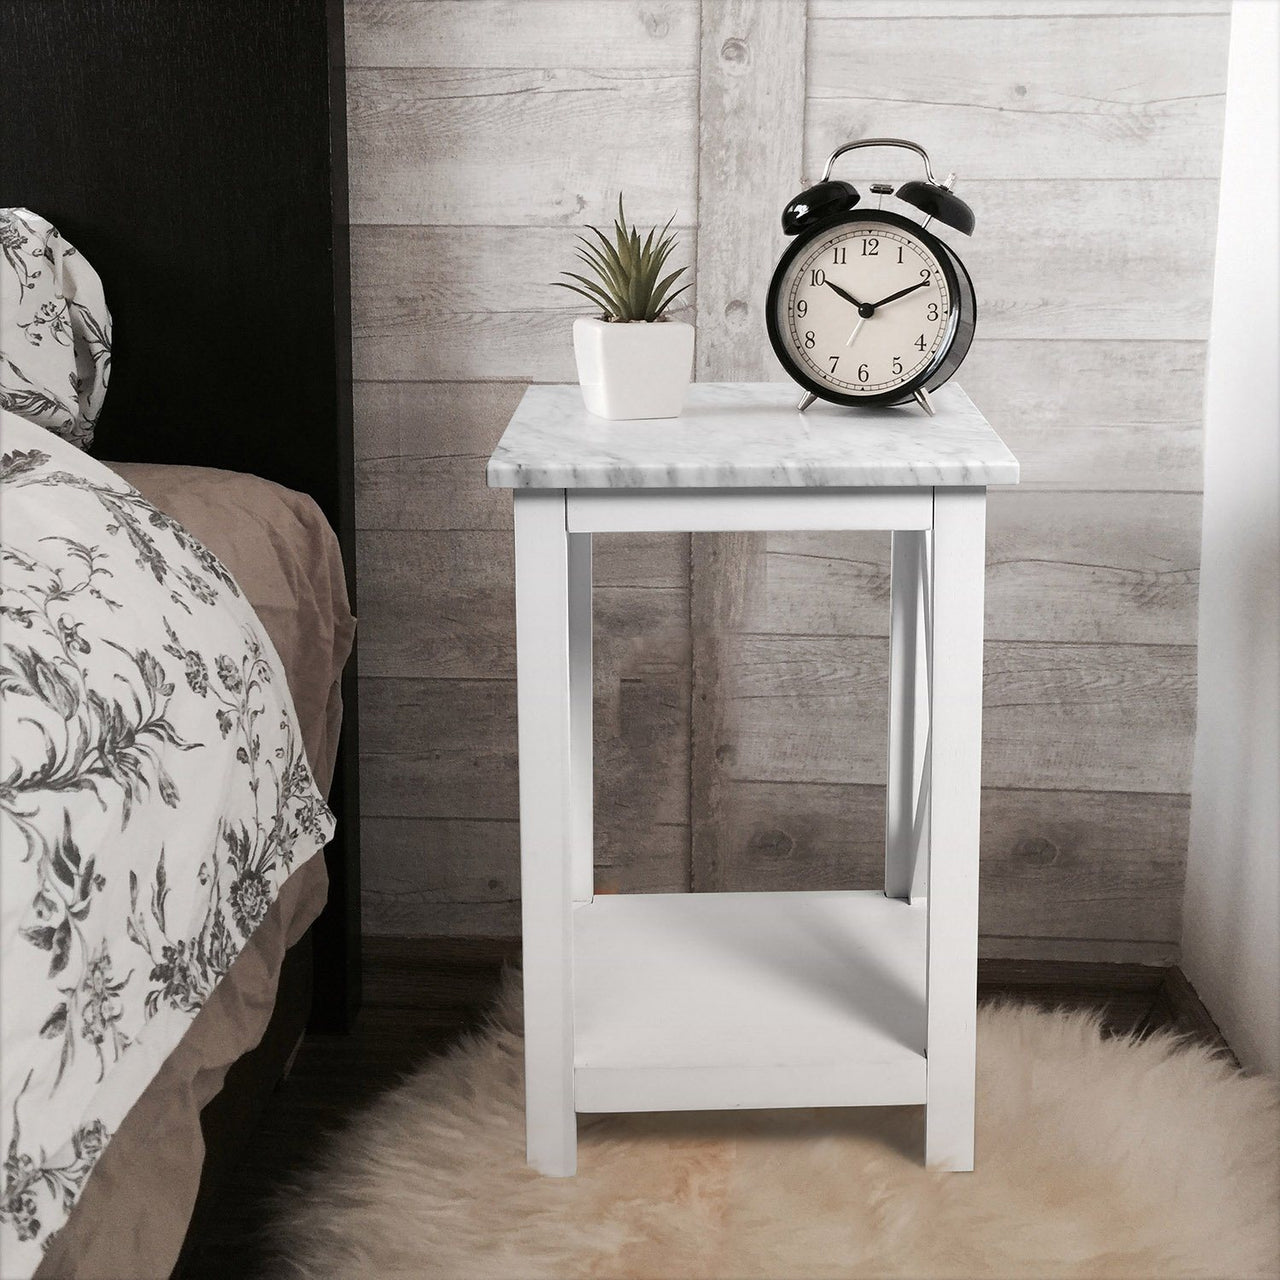 Agatha 15" Square Italian Carrara White Marble Side Table with Color Solid Wood Legs Writing Desk The Bianco Collection 